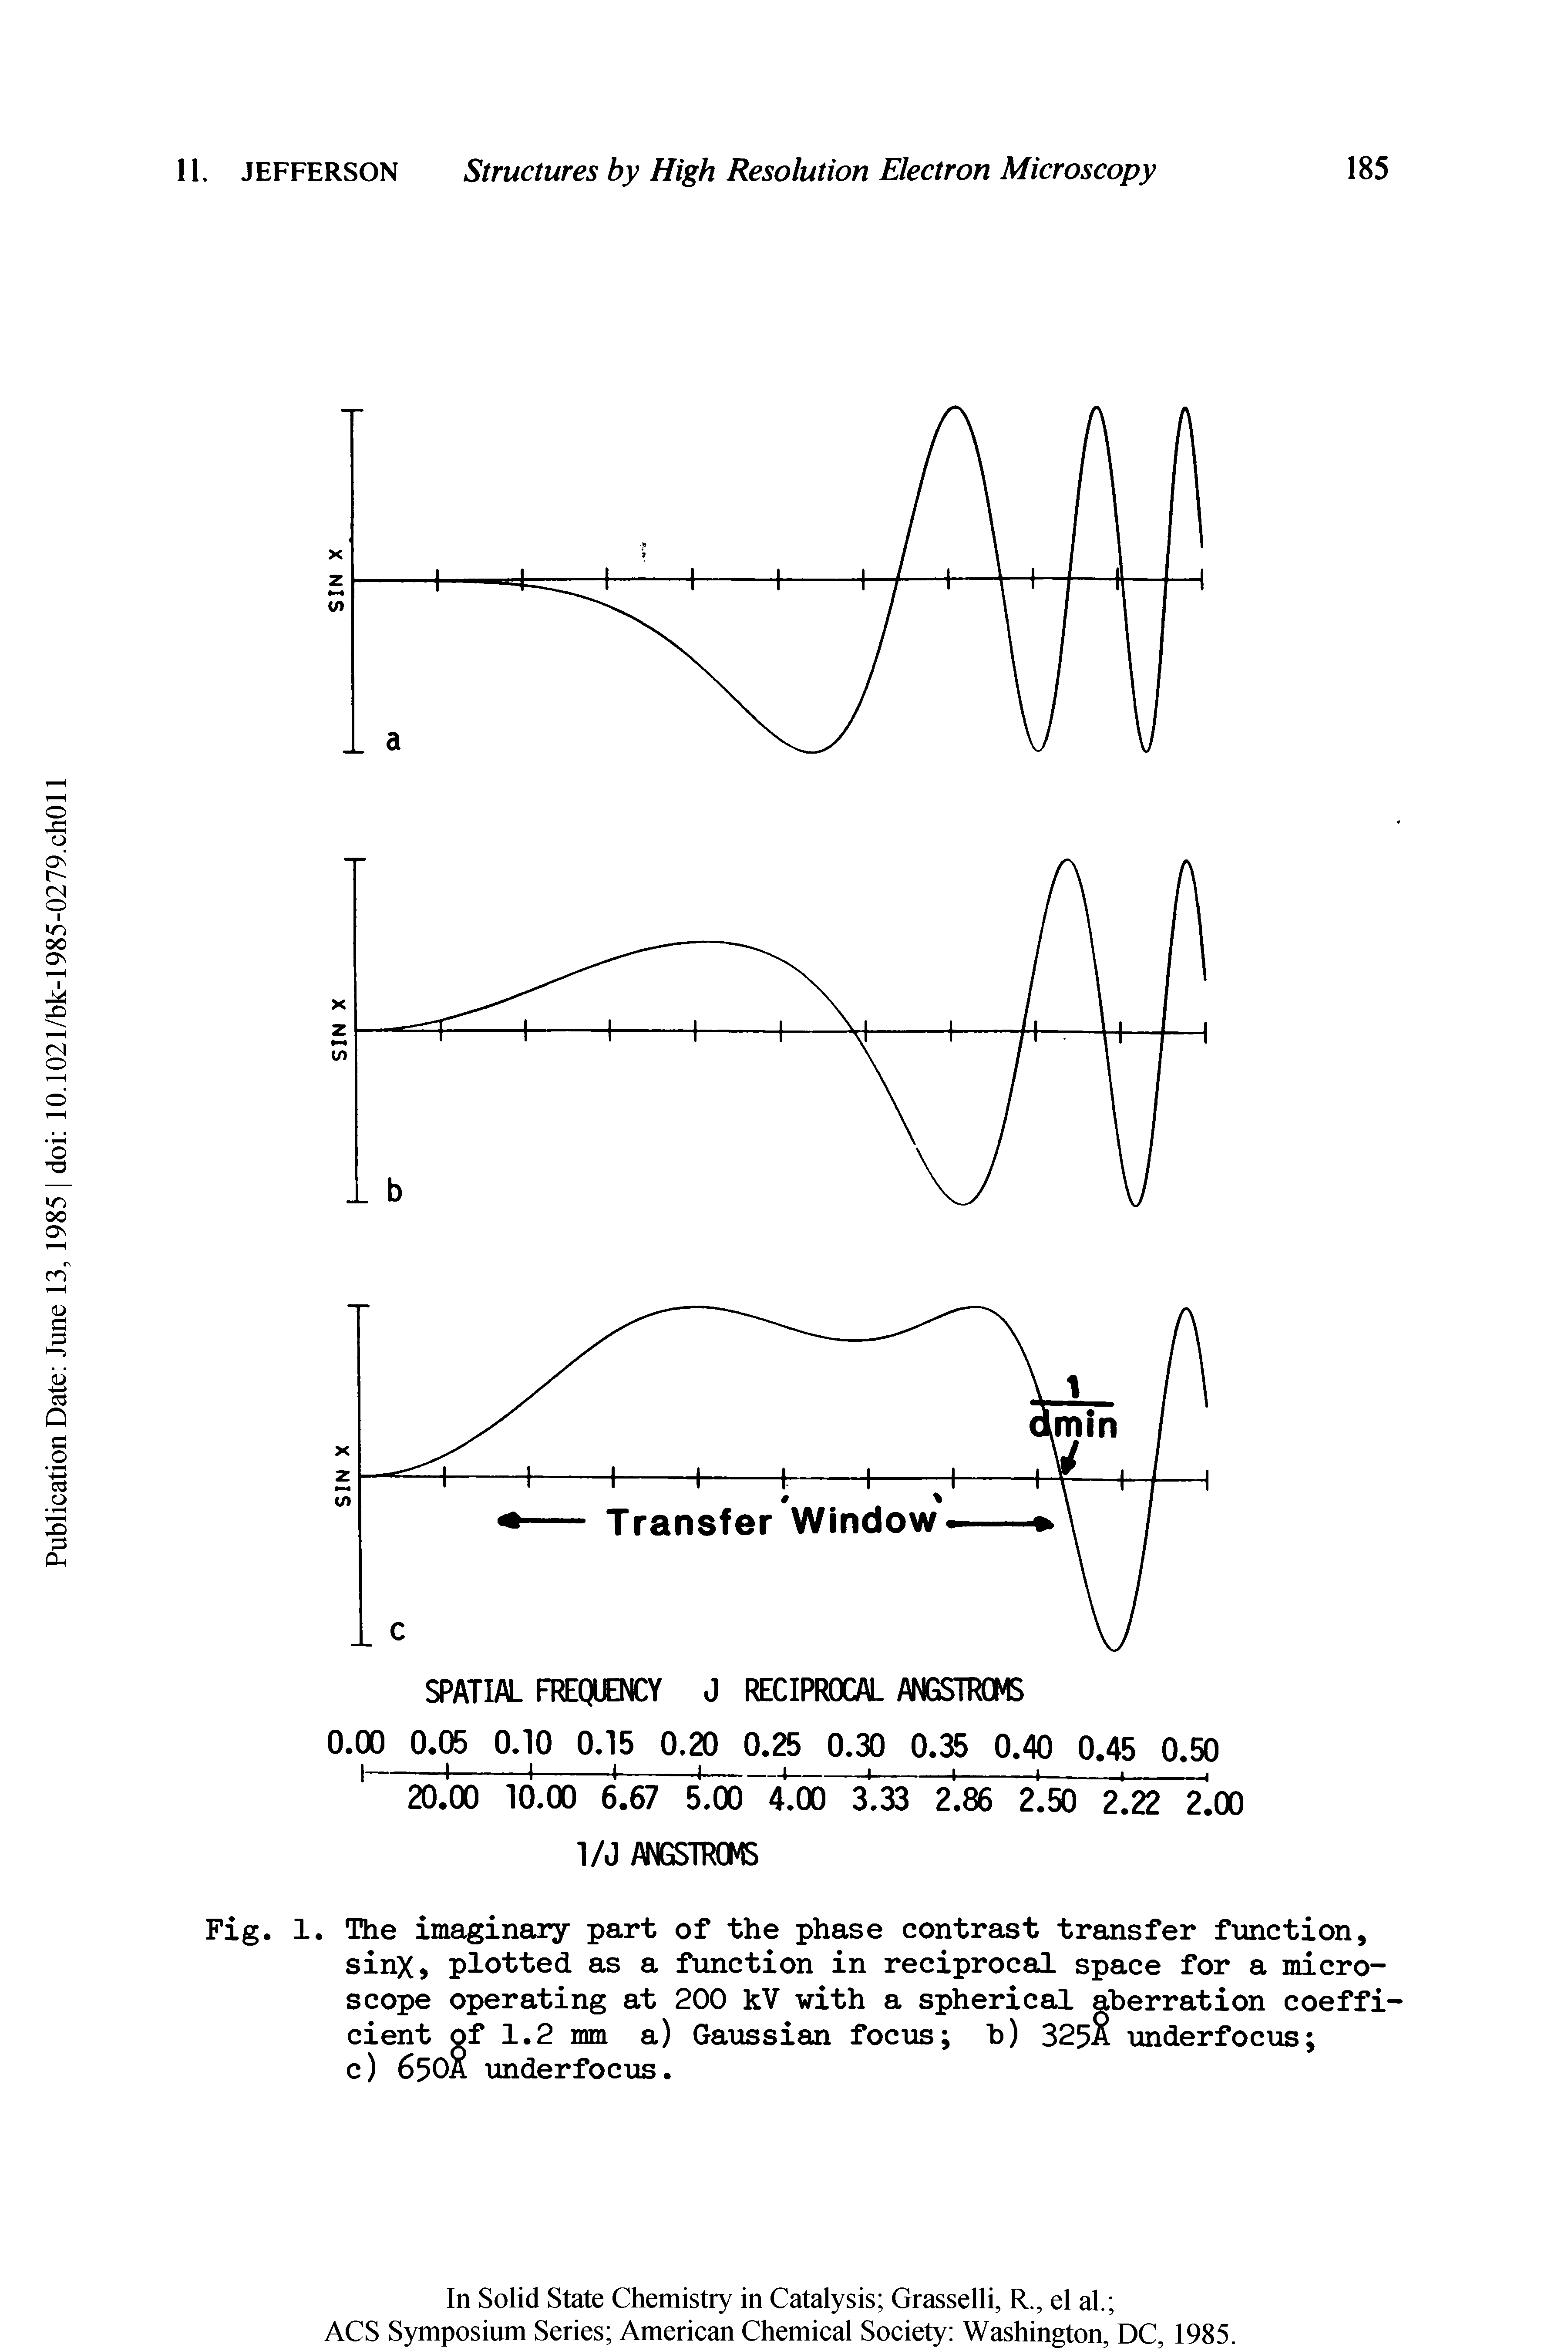 Fig. 1. The imaginary part of the phase contrast transfer function, sinX, plotted as a function in reciprocal space for a microscope operating at 200 kV with a spherical aberration coefficient of 1.2 mm a) Gaussian focus b) 325A underfocus c) 65OA underfocus.